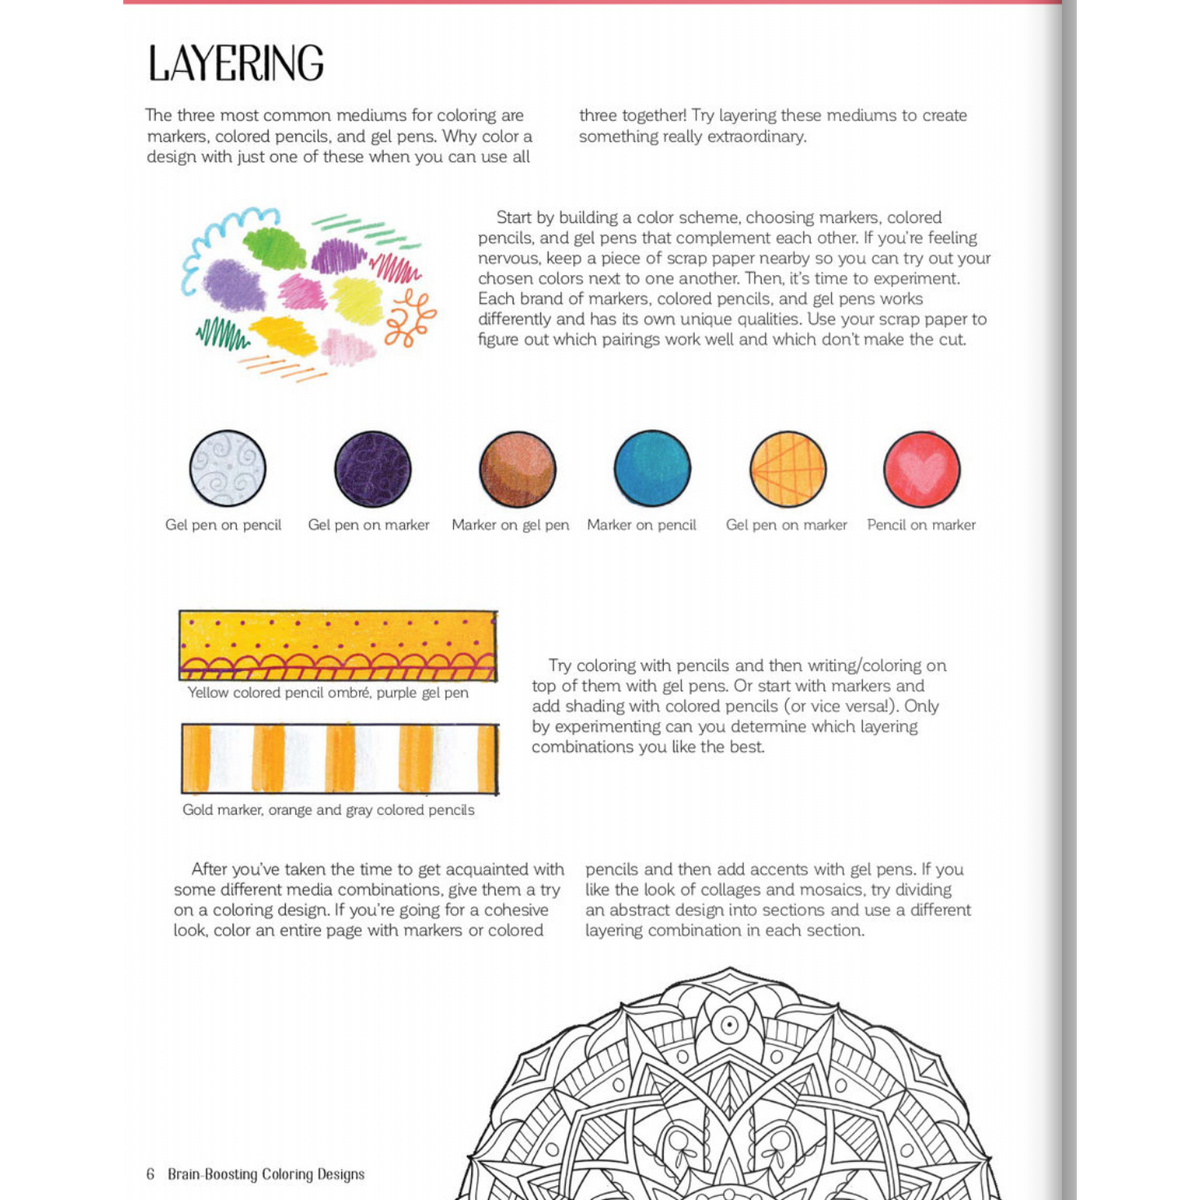 Coloring Book - Brain-Boosting Coloring Designs-Arts &amp; Humanities-Yellow Springs Toy Company